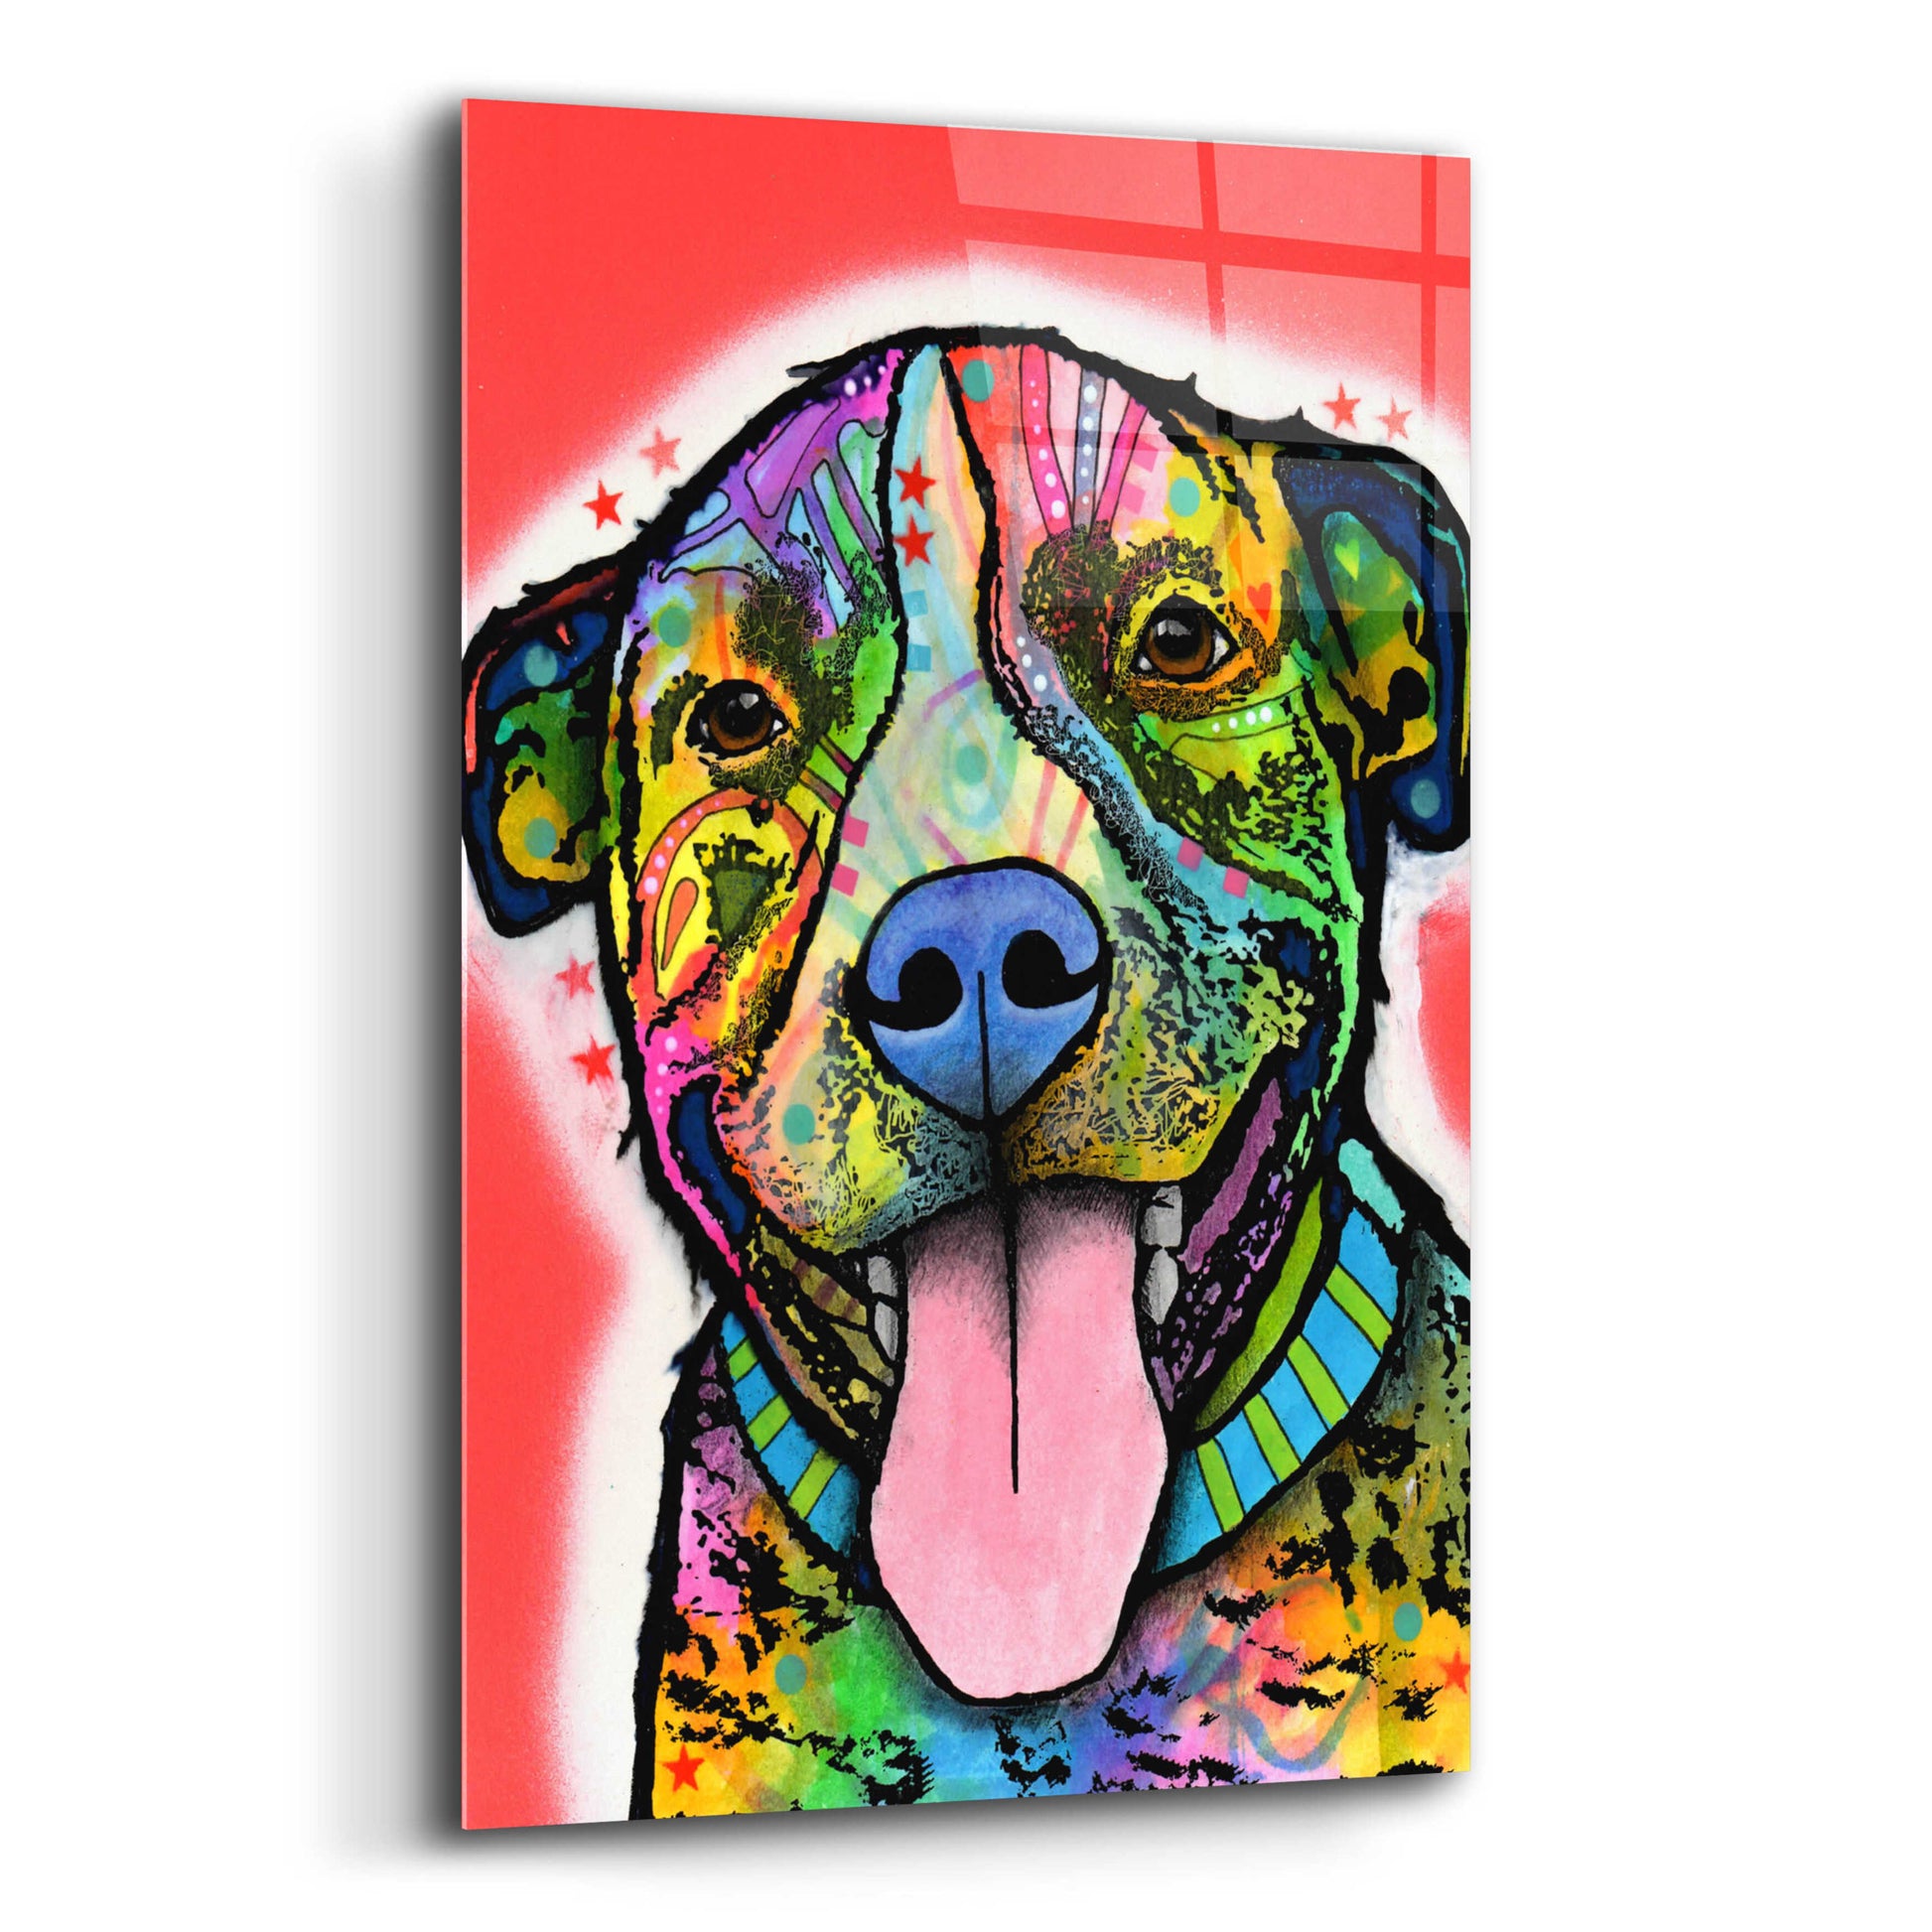 Epic Art 'Smiling Pit Bull zoey' by Dean Russo, Acrylic Glass Wall Art,12x16